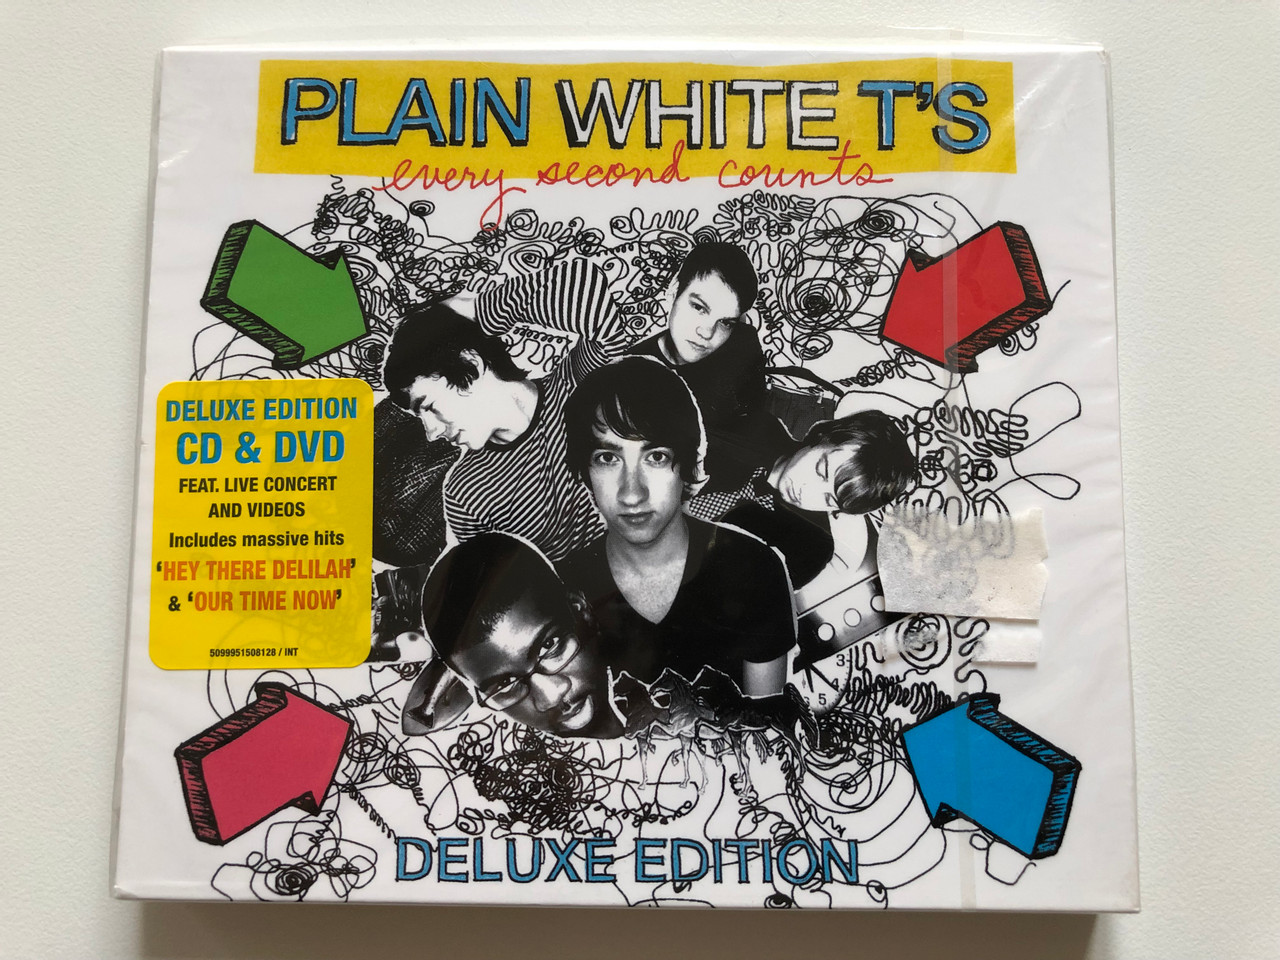 https://cdn10.bigcommerce.com/s-62bdpkt7pb/products/0/images/221156/Plain_White_Ts_Every_Second_Counts_Deluxe_Edition_CD_DVD_Feat._Live_Concert_And_Videos_Includes_massive_hits_Hey_There_Delilah_Our_Time_Now_Hollywood_Records_Audio_CD_DVD_Video_1__55059.1649409950.1280.1280.JPG?c=2&_gl=1*1fkcz0c*_ga*MjA2NTIxMjE2MC4xNTkwNTEyNTMy*_ga_WS2VZYPC6G*MTY0OTQwOTM3NC4zNDkuMS4xNjQ5NDA5OTMyLjYw